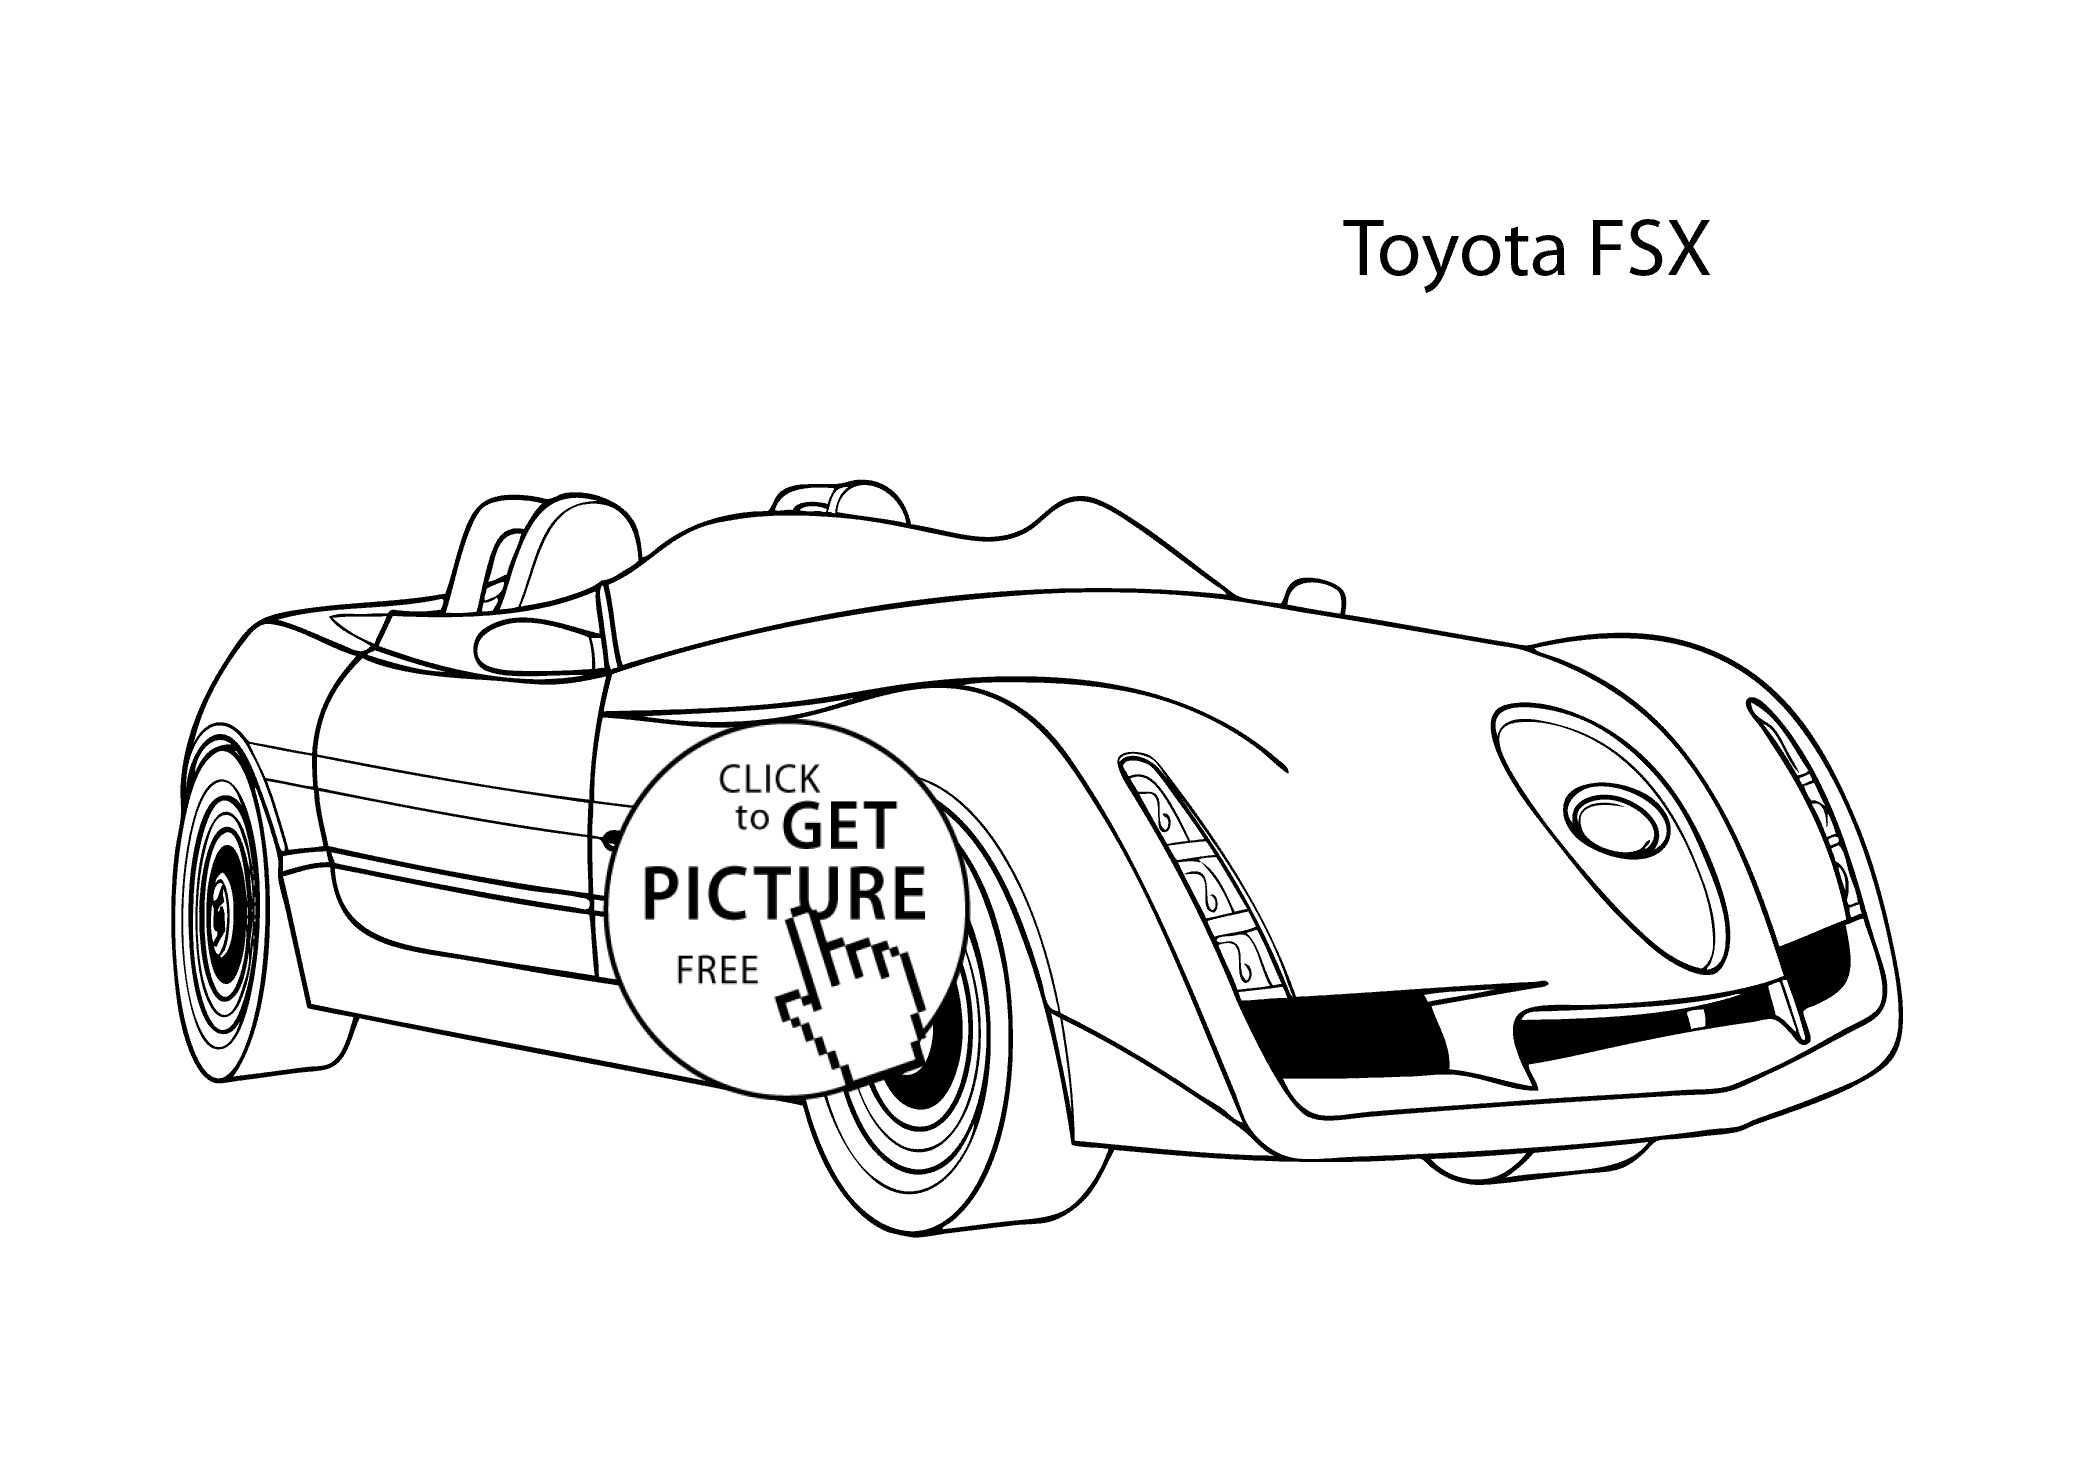 Super car Toyota FSX coloring page, cool car printable free